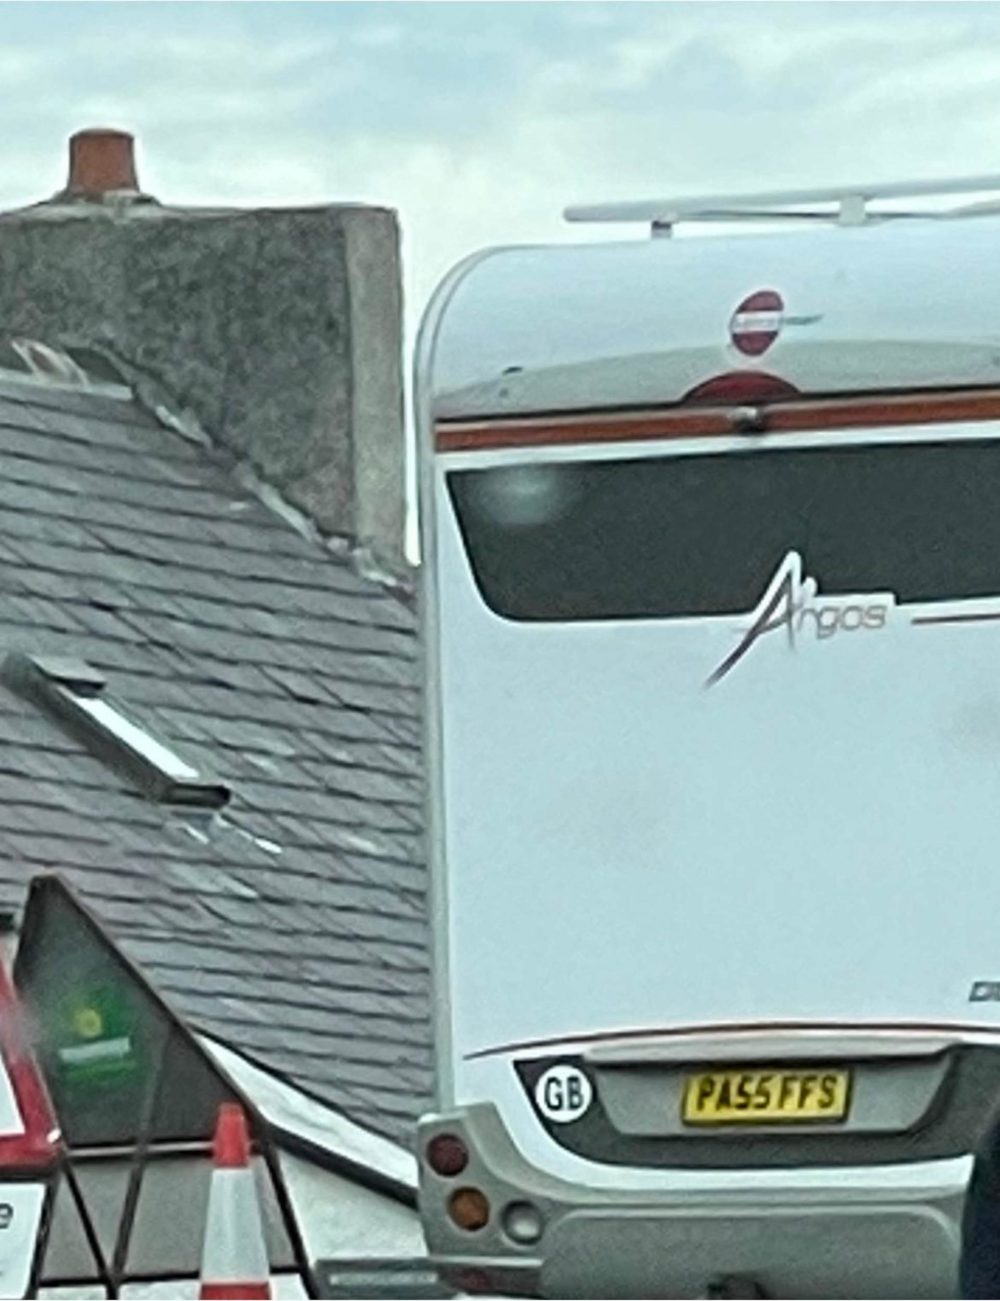 The campervan with the funny license plate | Scottish News